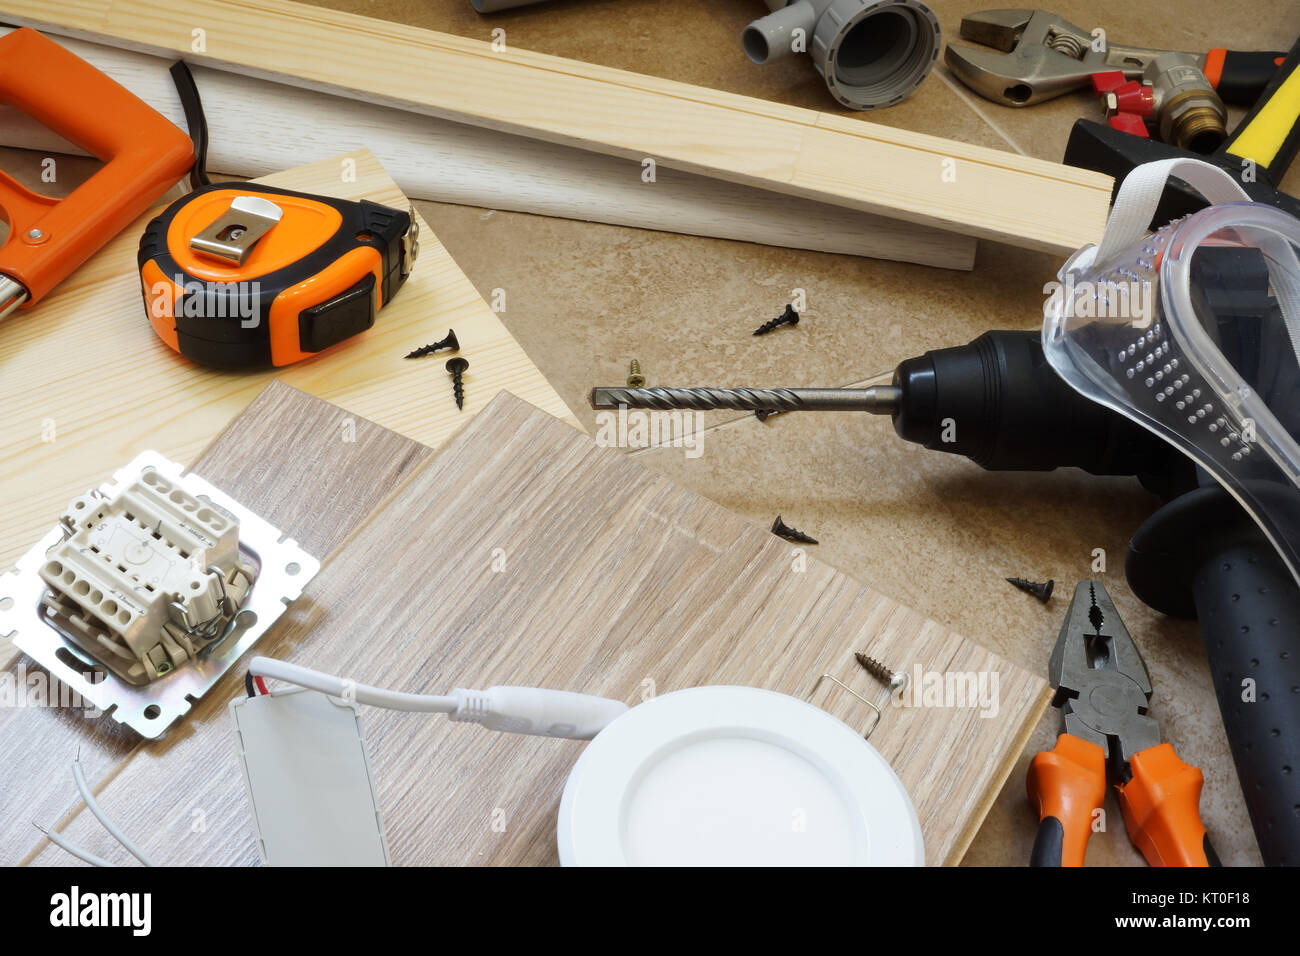 Apartment or house renovation. Working tools and accessories. Stock Photo